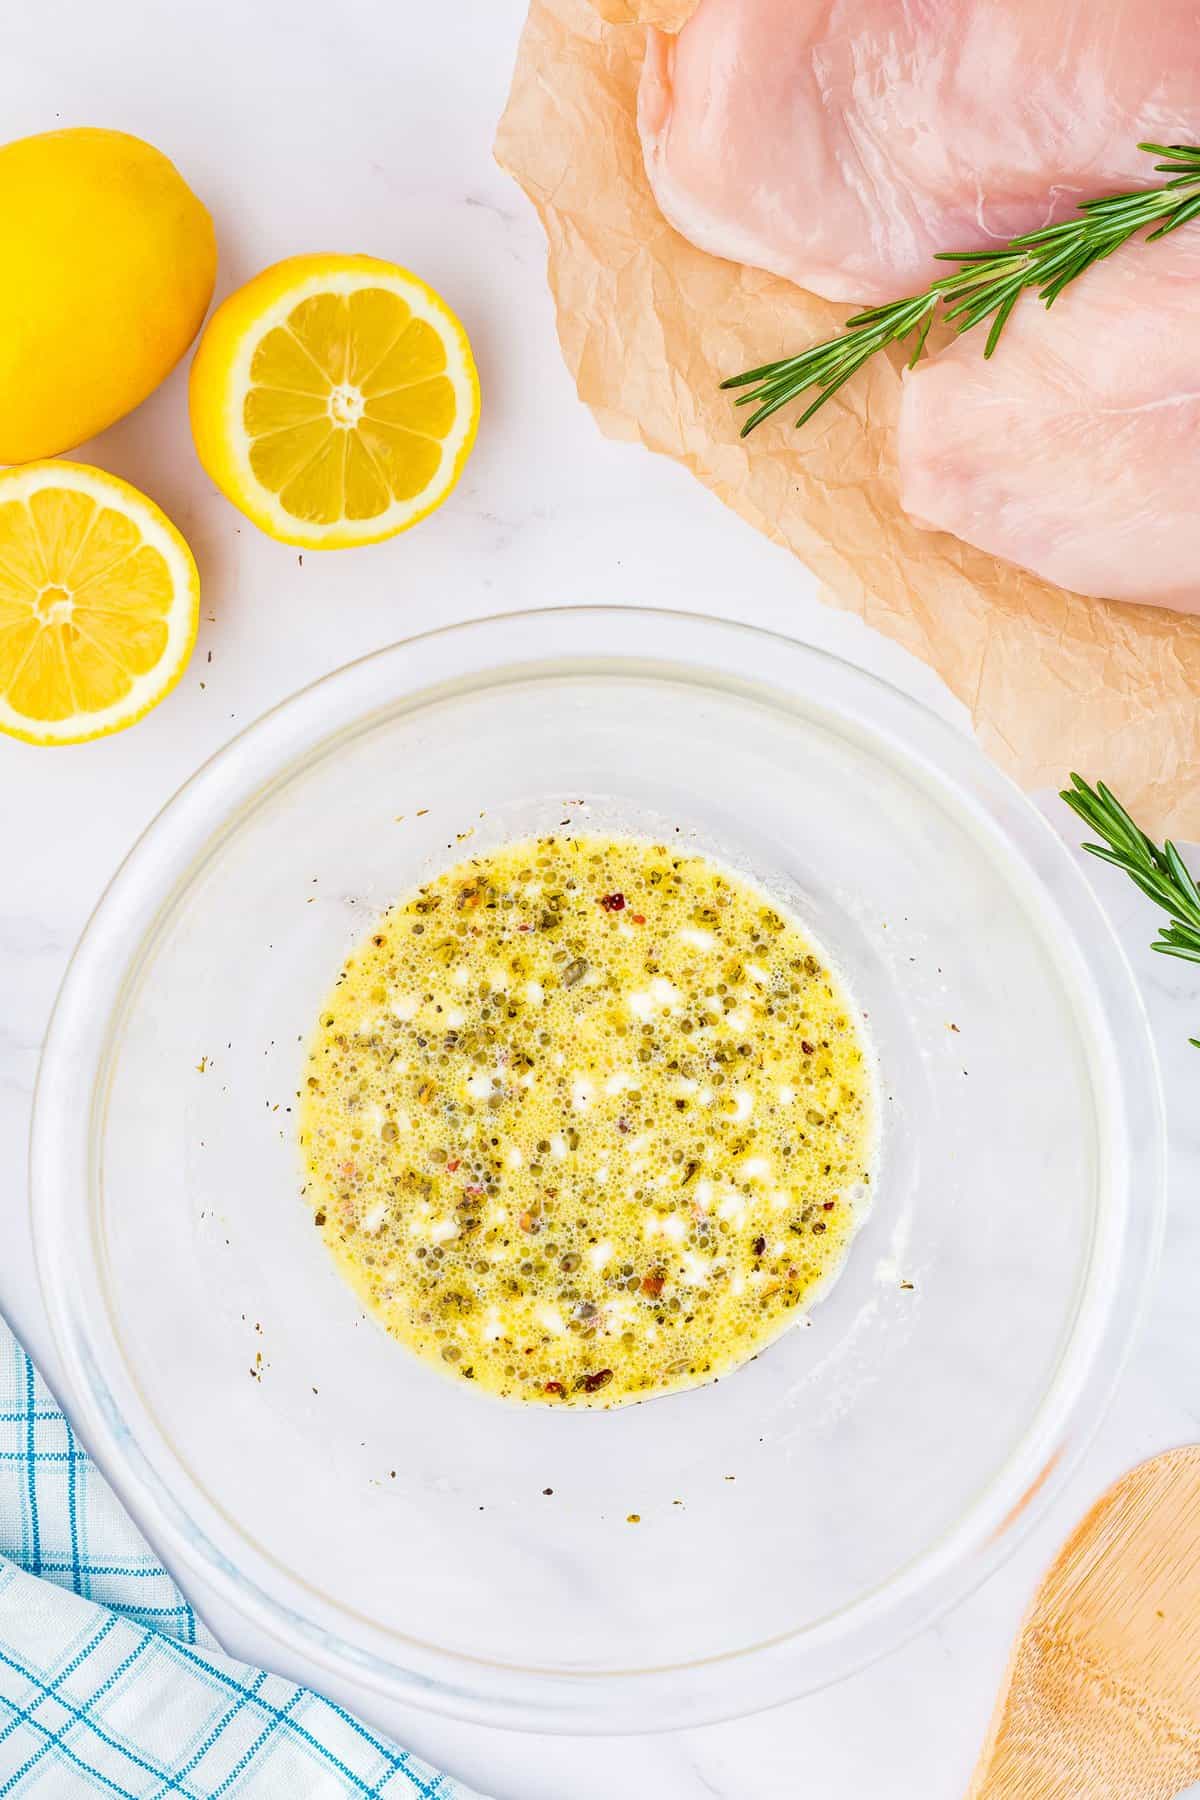 Mixed lemon marinade for chicken in bowl